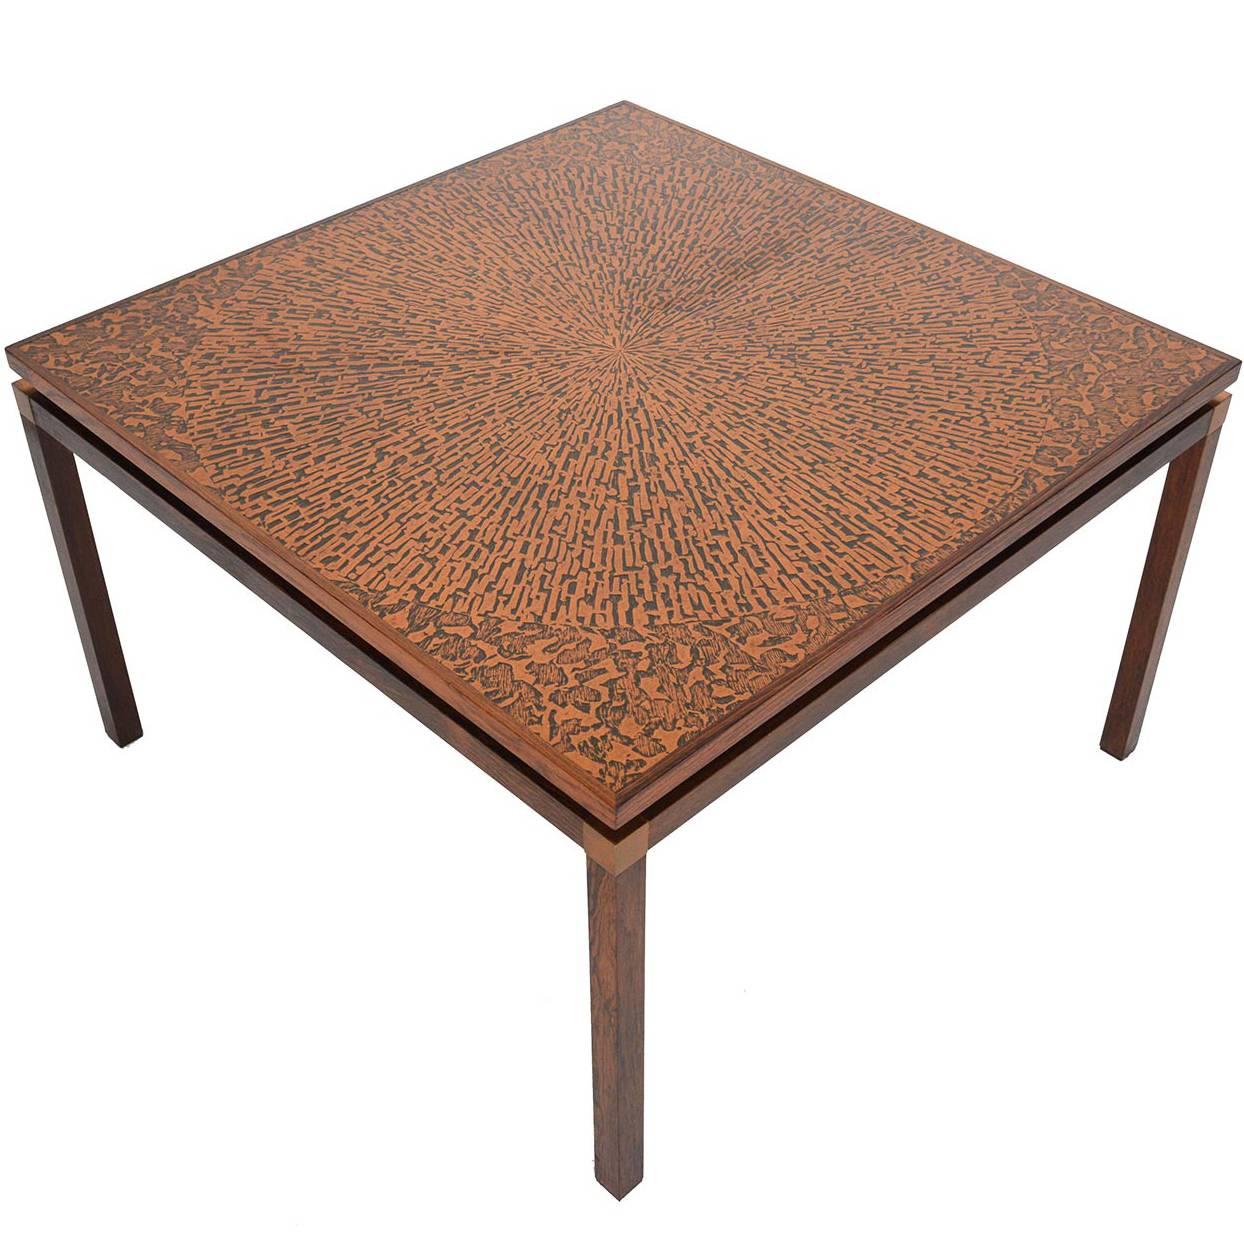 Danish Modern Rosewood and Copper Coffee Table